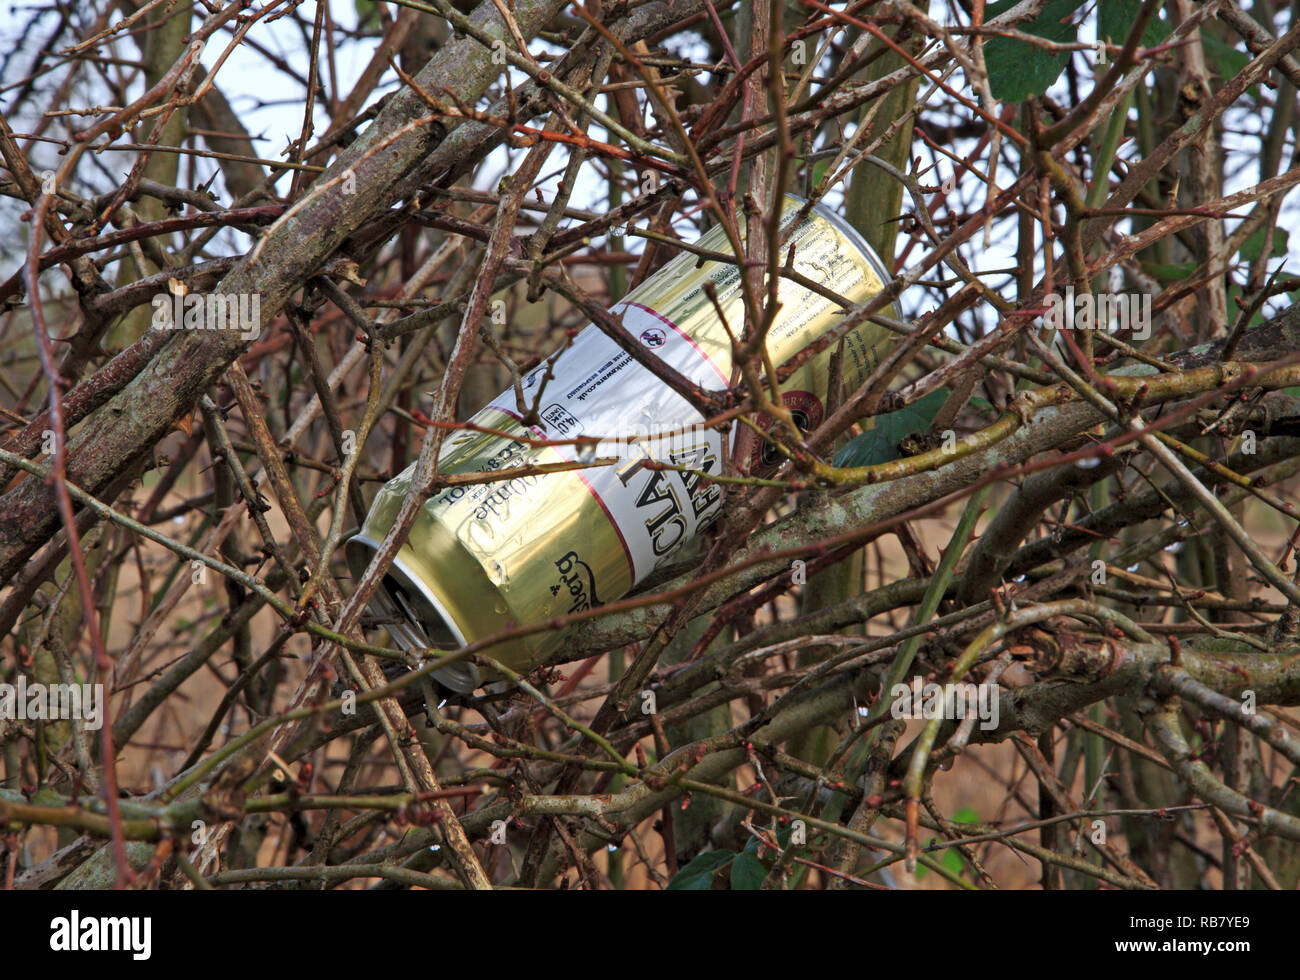 An empty drinks can lodged in a roadside hedge in the Norfolk countryside. Stock Photo